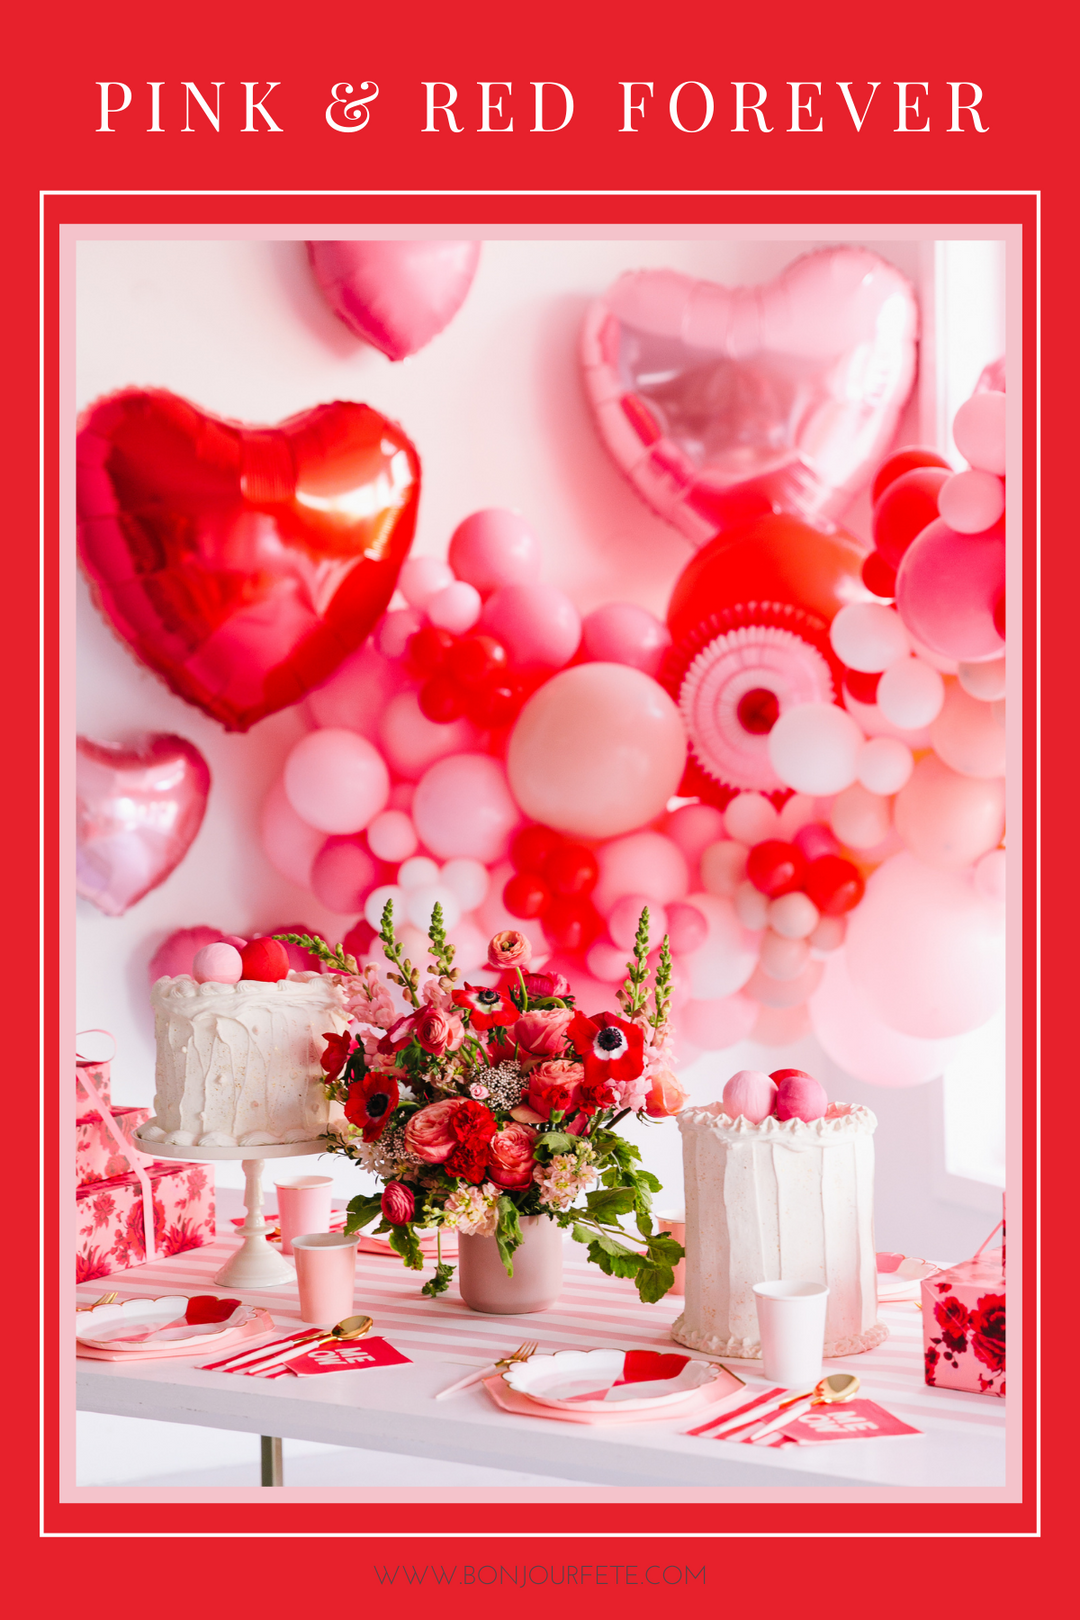 CLASSIC RED & PINK VALENTINE'S DAY DECORATIONS